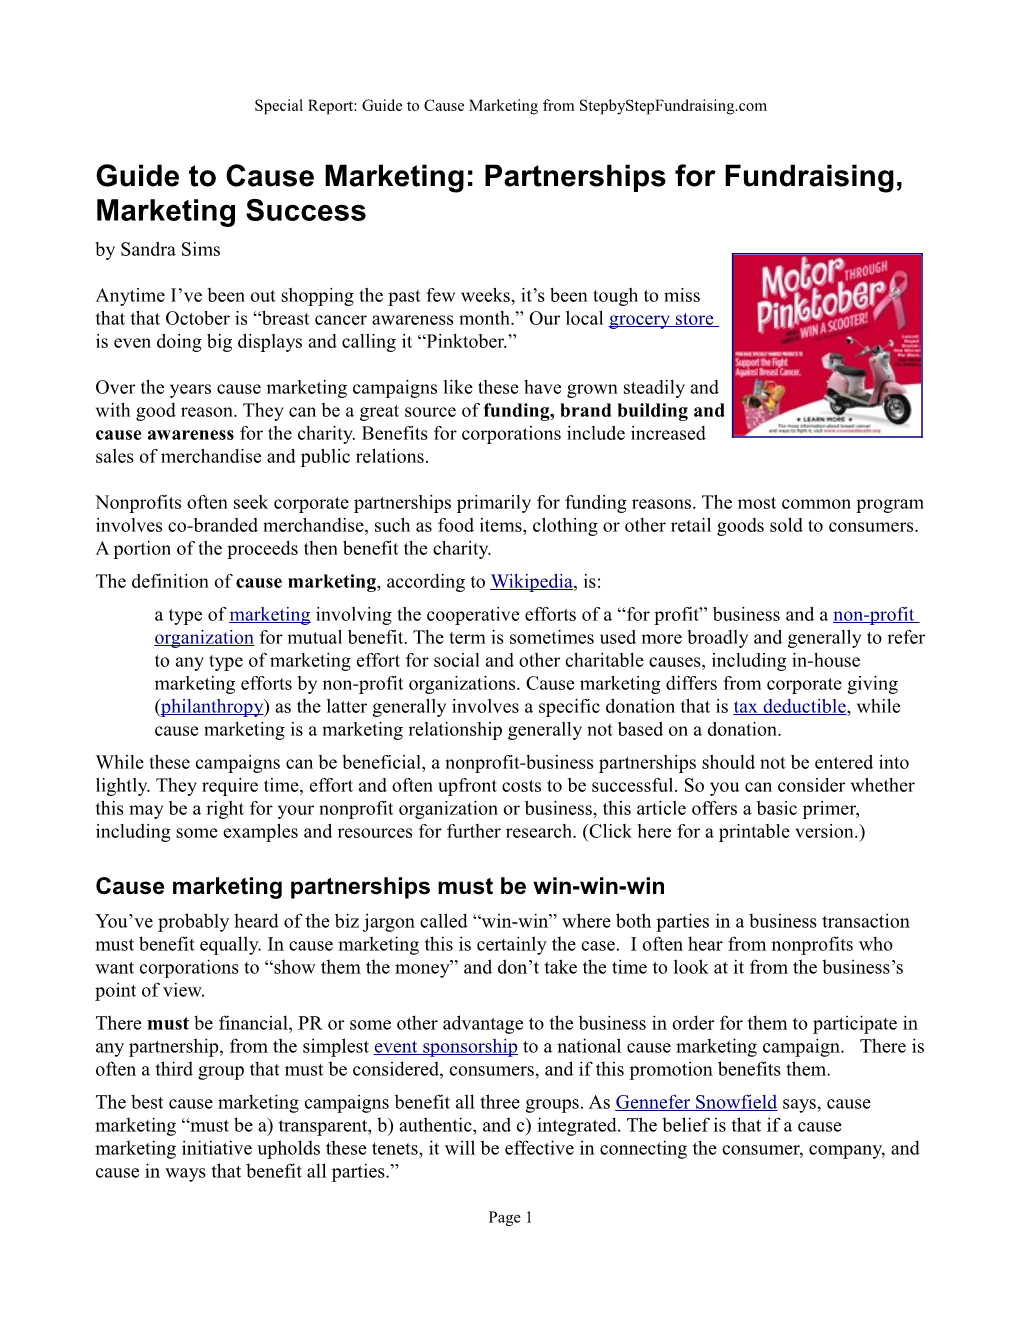 Guide to Cause Marketing: Partnerships for Fundraising, Marketing Success by Sandra Sims